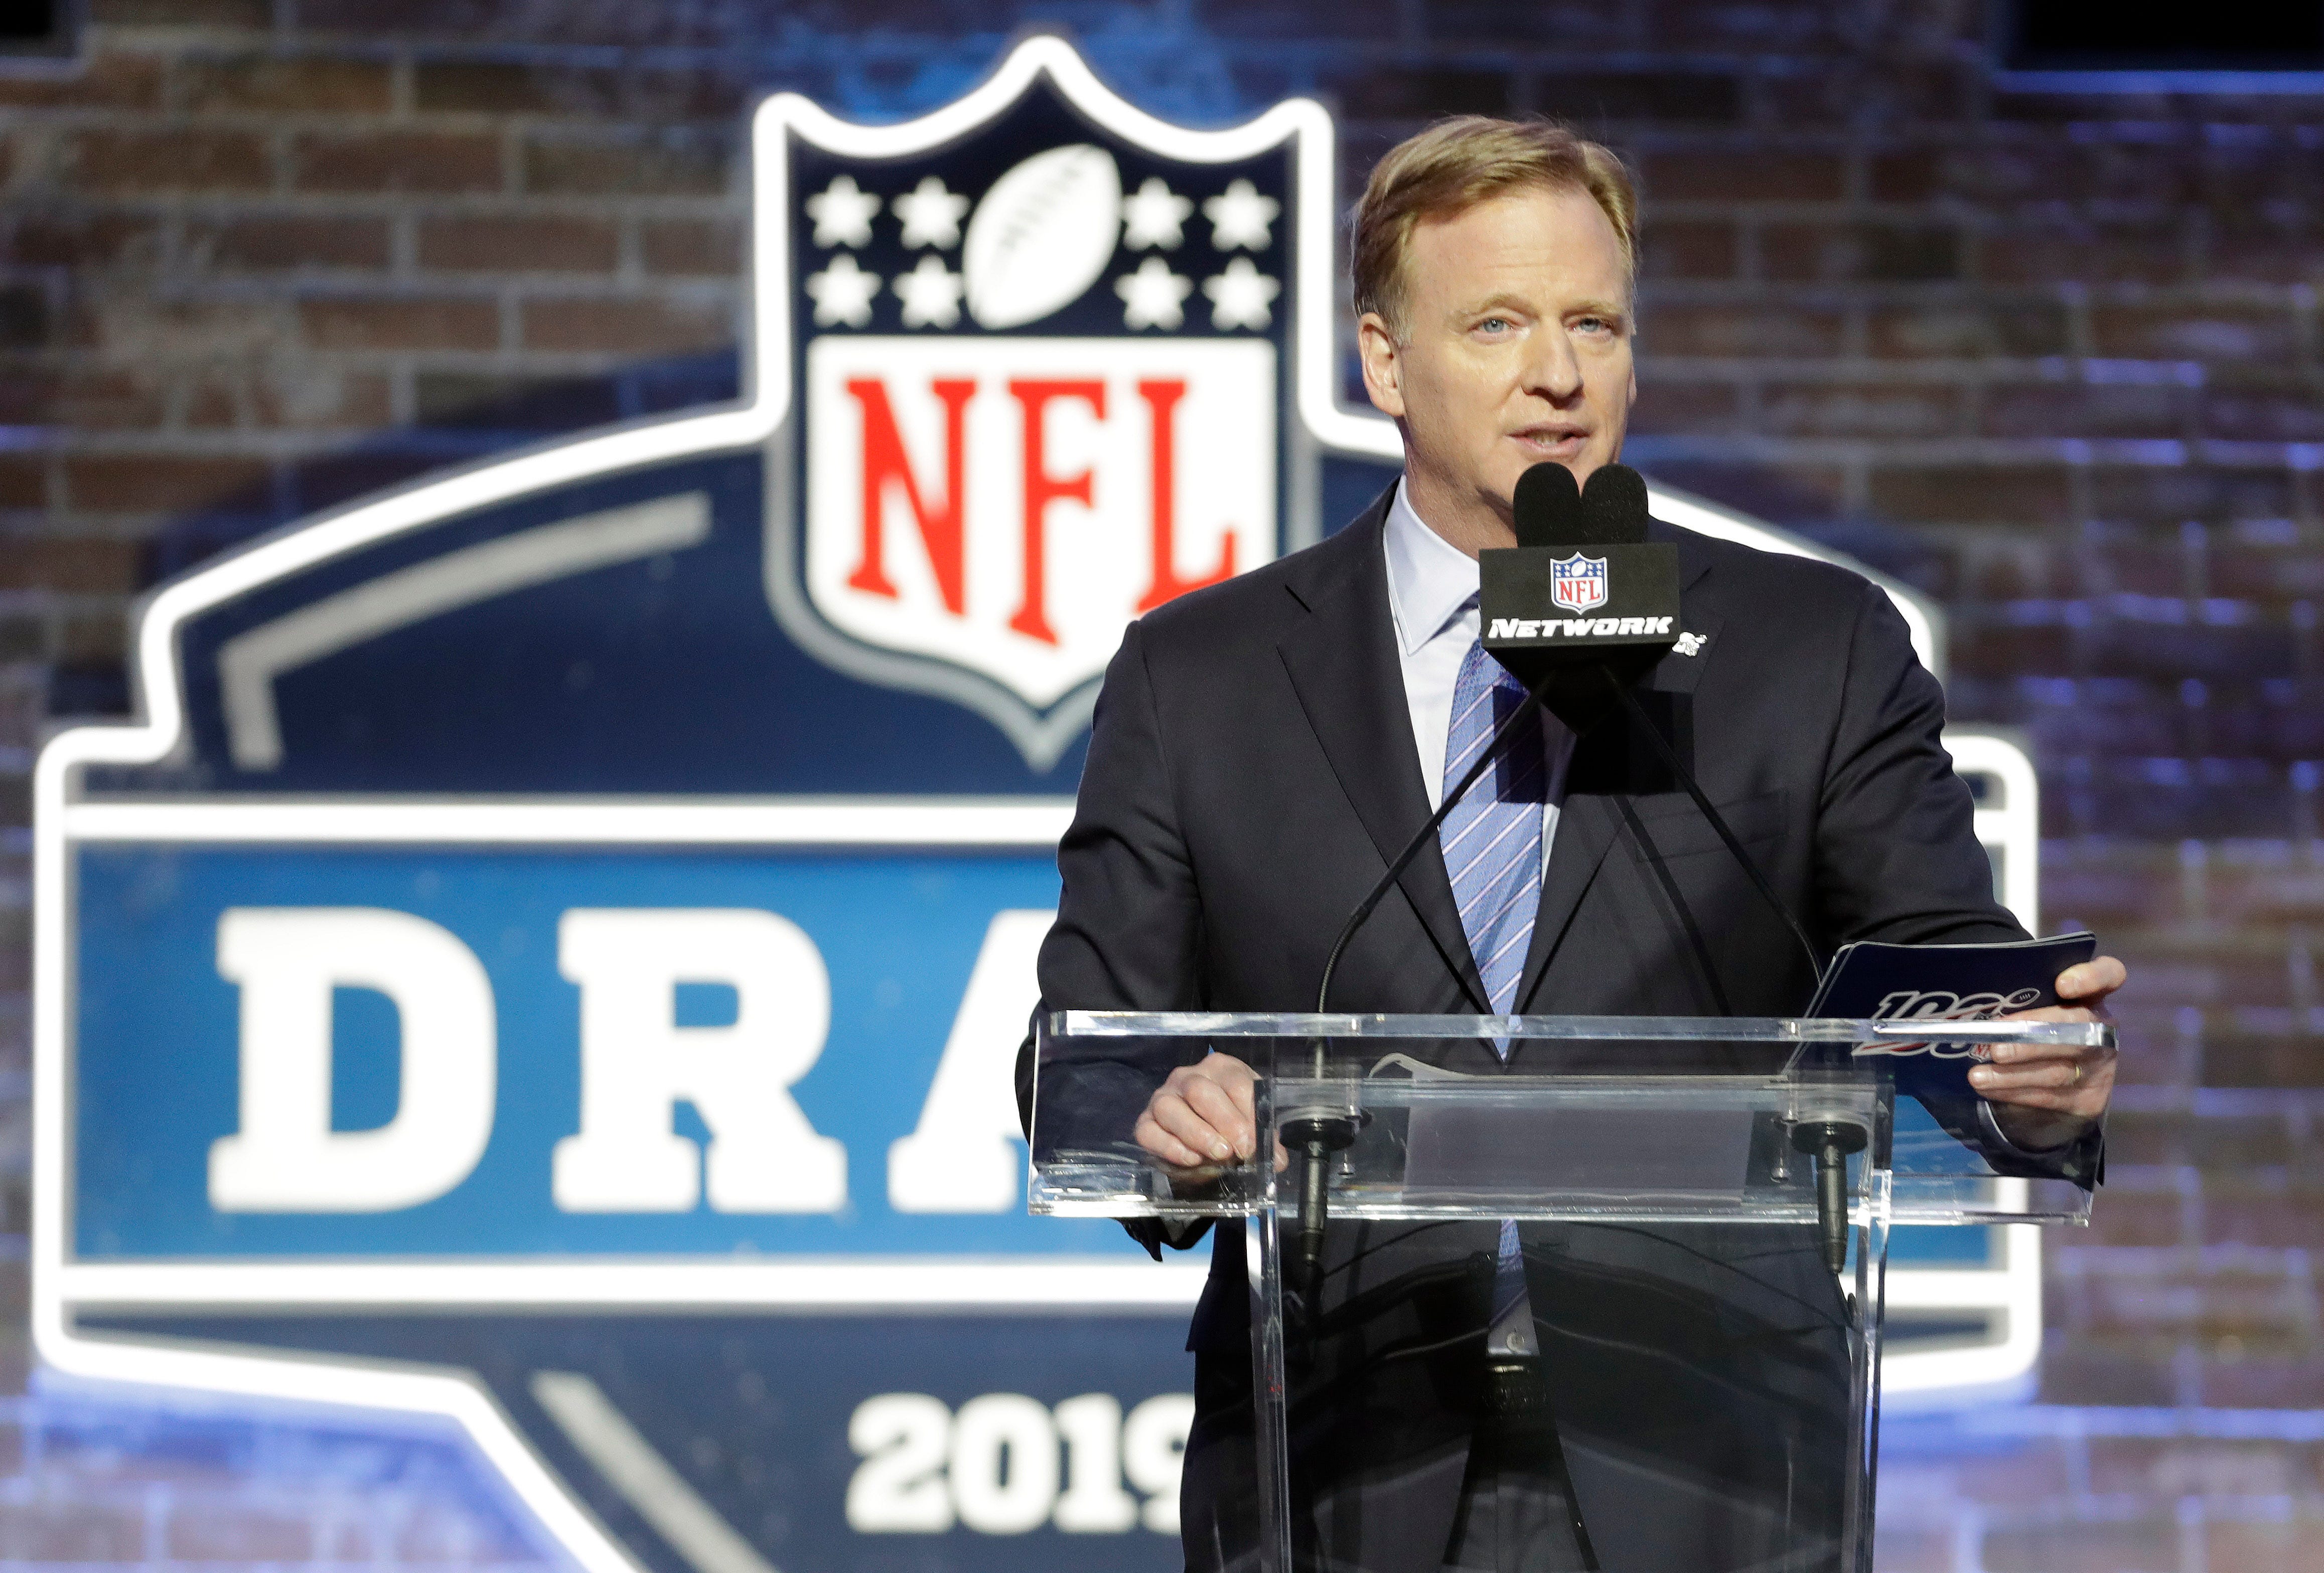 Opinion: NFL wise to make draft 'fully virtual.' Here's how to make it fun